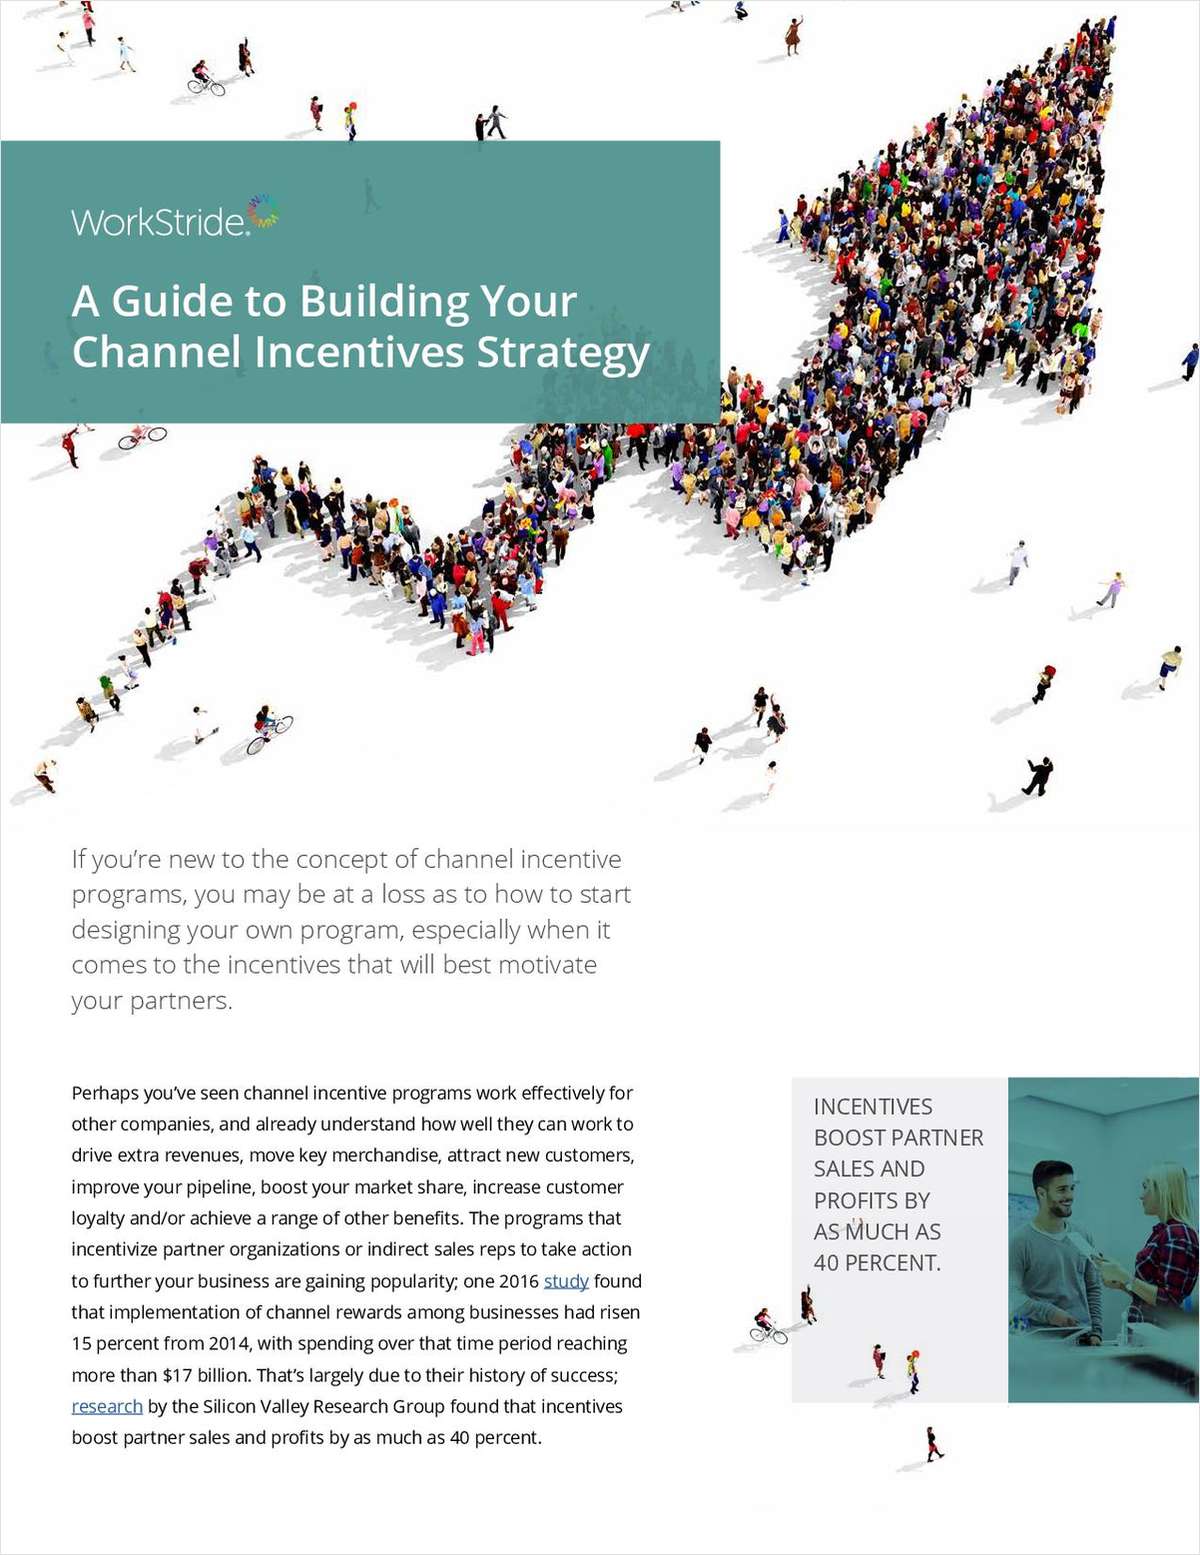 A Guide to Building Your Channel Incentives Strategy